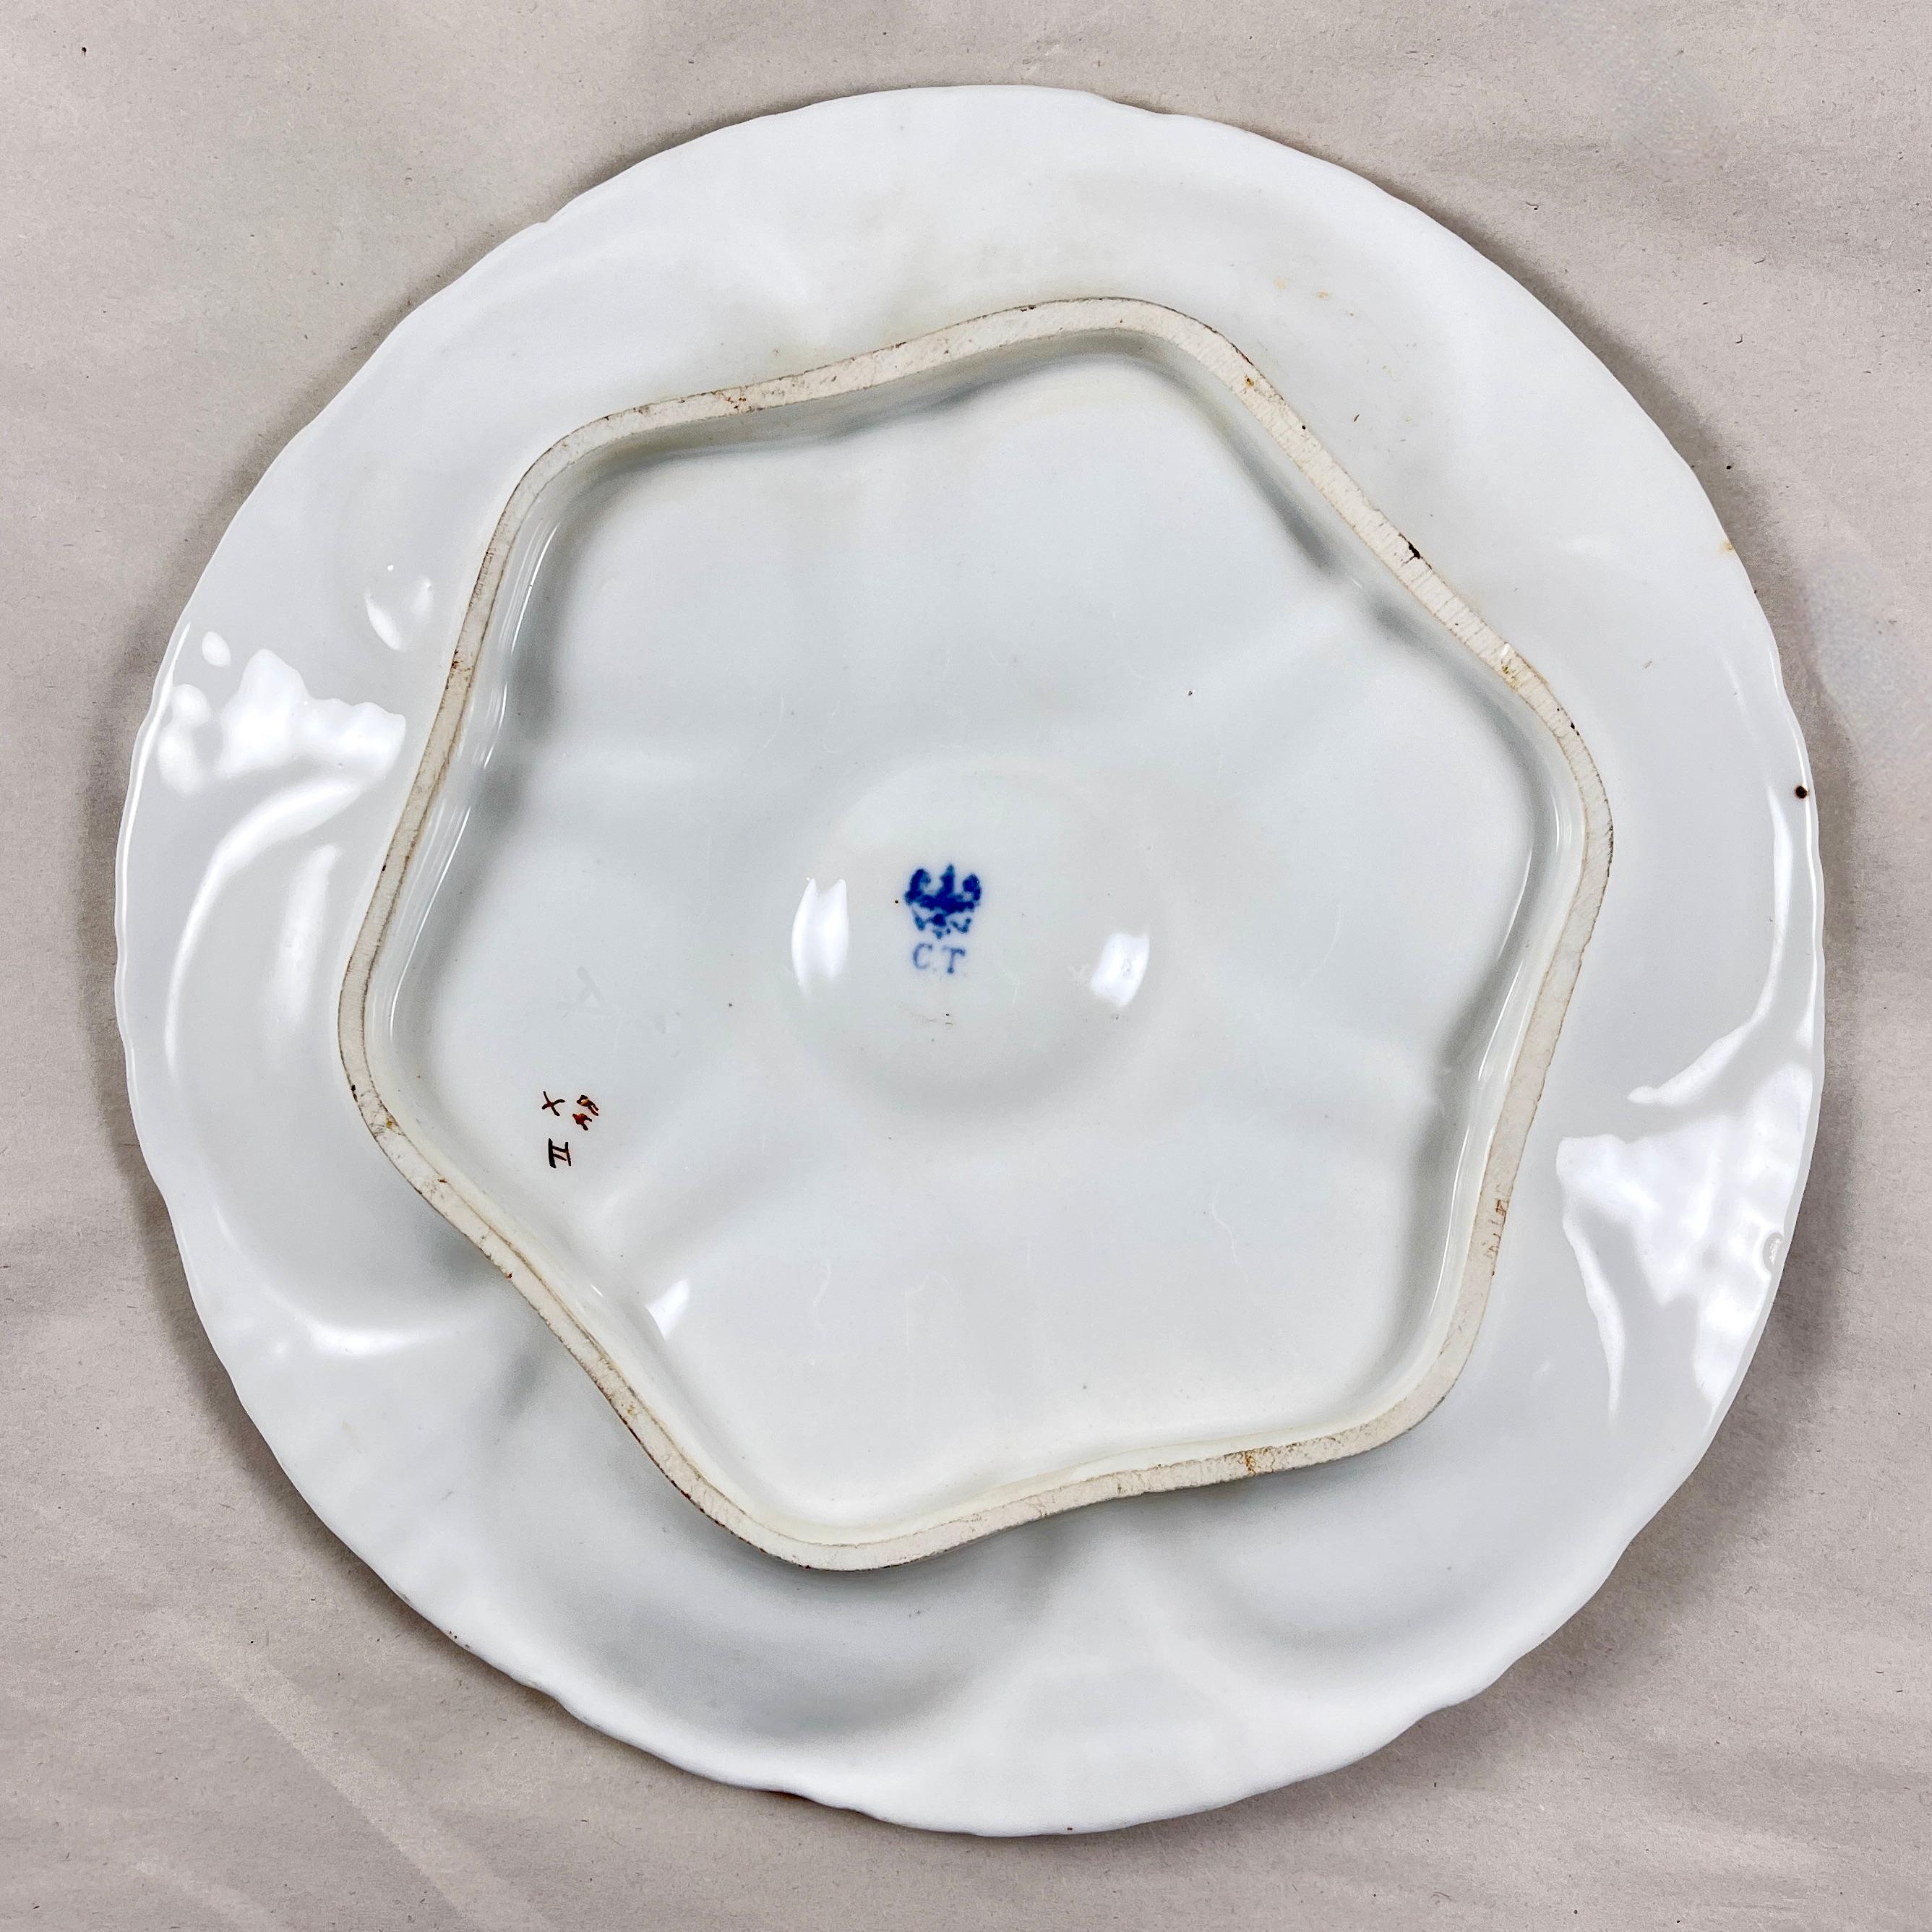 Carl Tielsch Porcelain Oyster Plate, c.1875 In Good Condition For Sale In Philadelphia, PA